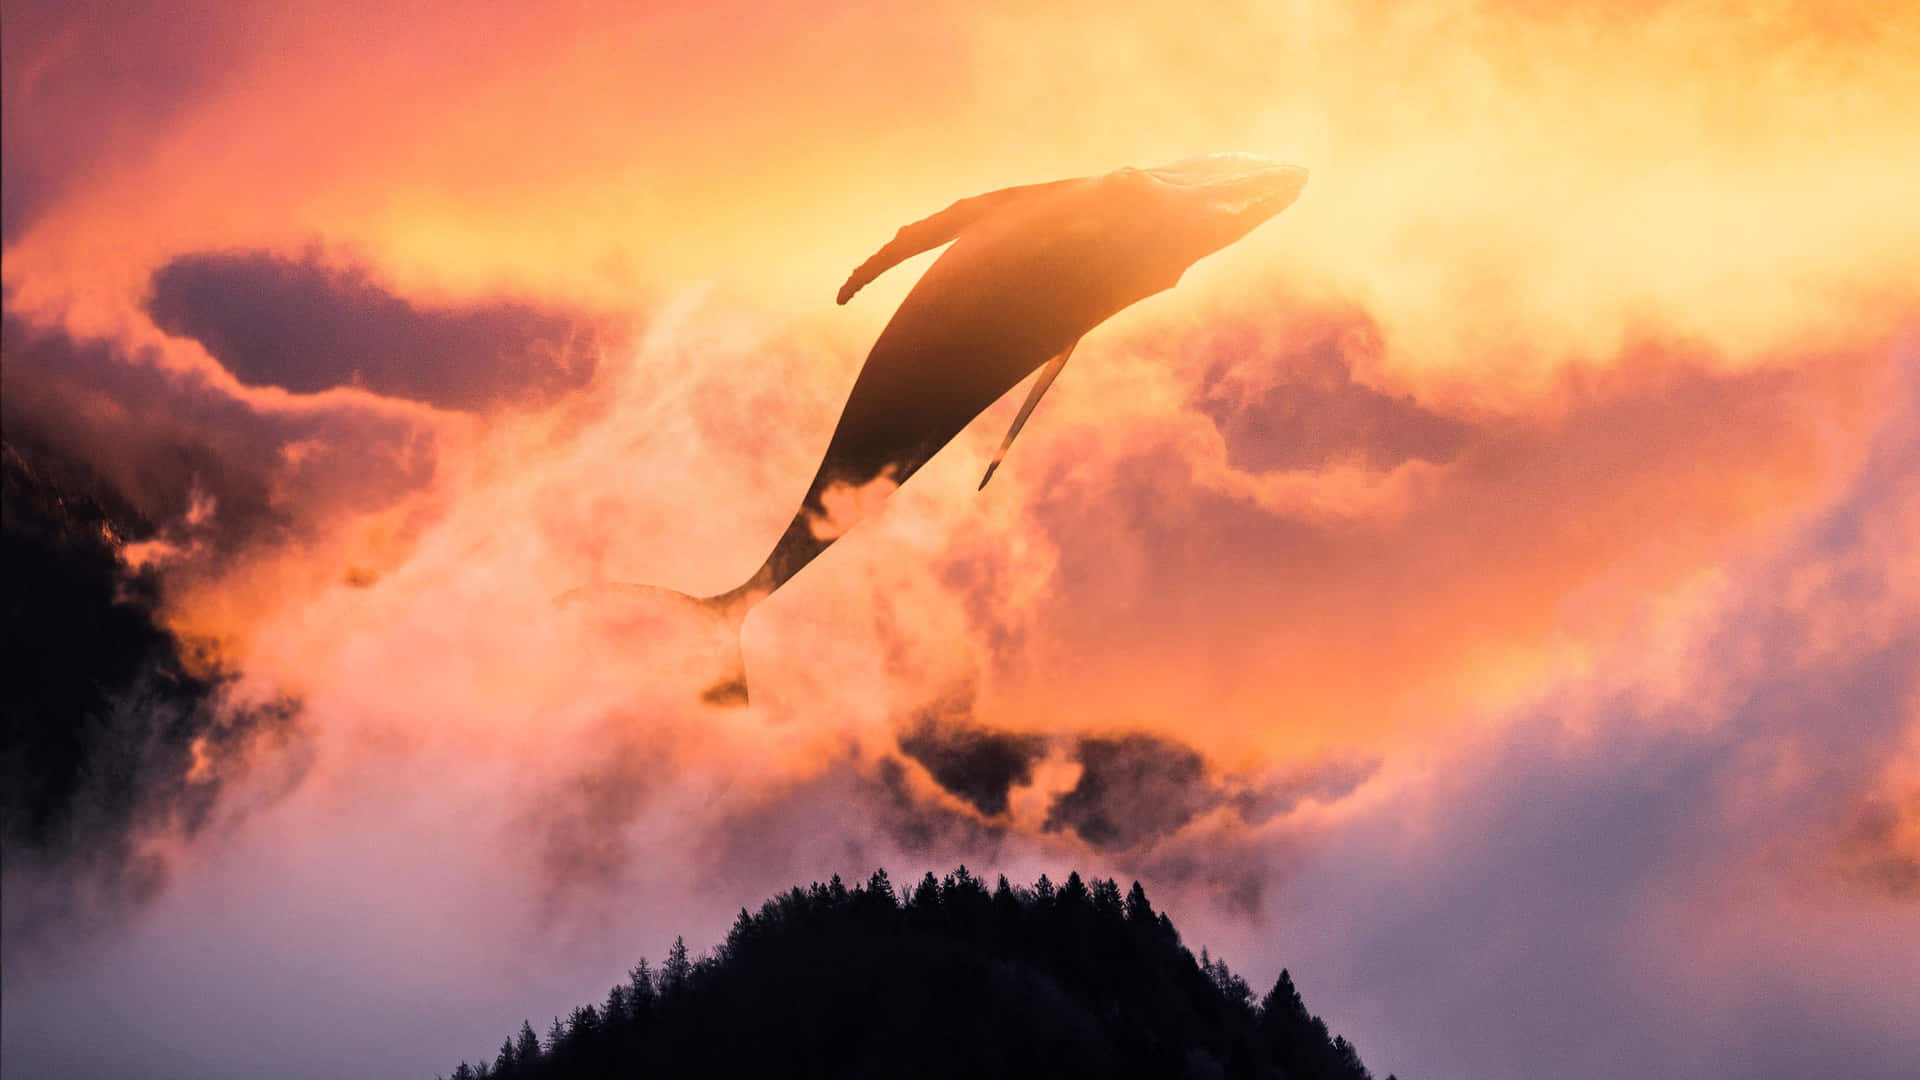 Skybound_ Whale_at_ Dusk Wallpaper